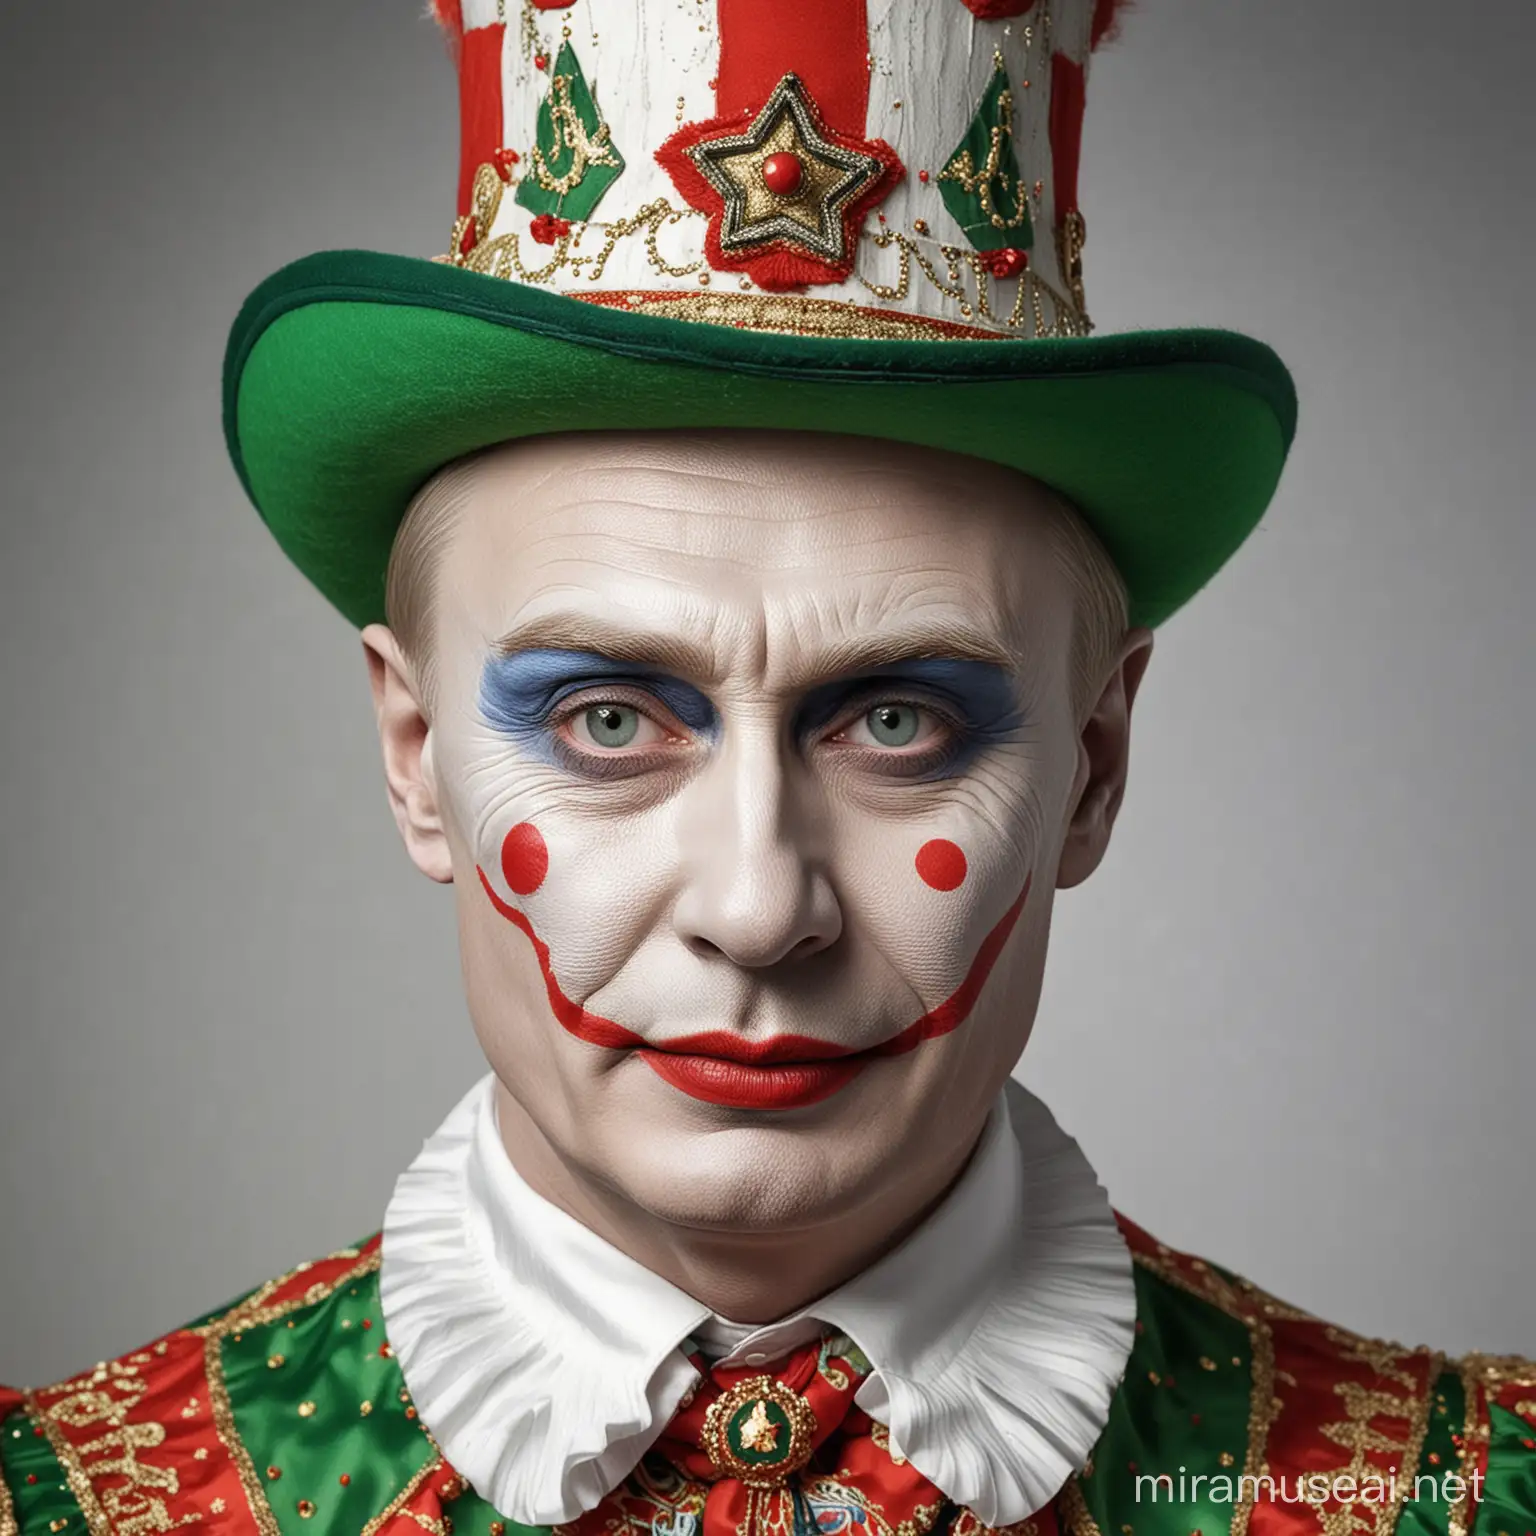 Russian President Putin in Clown Costume with White Makeup and Green Hat